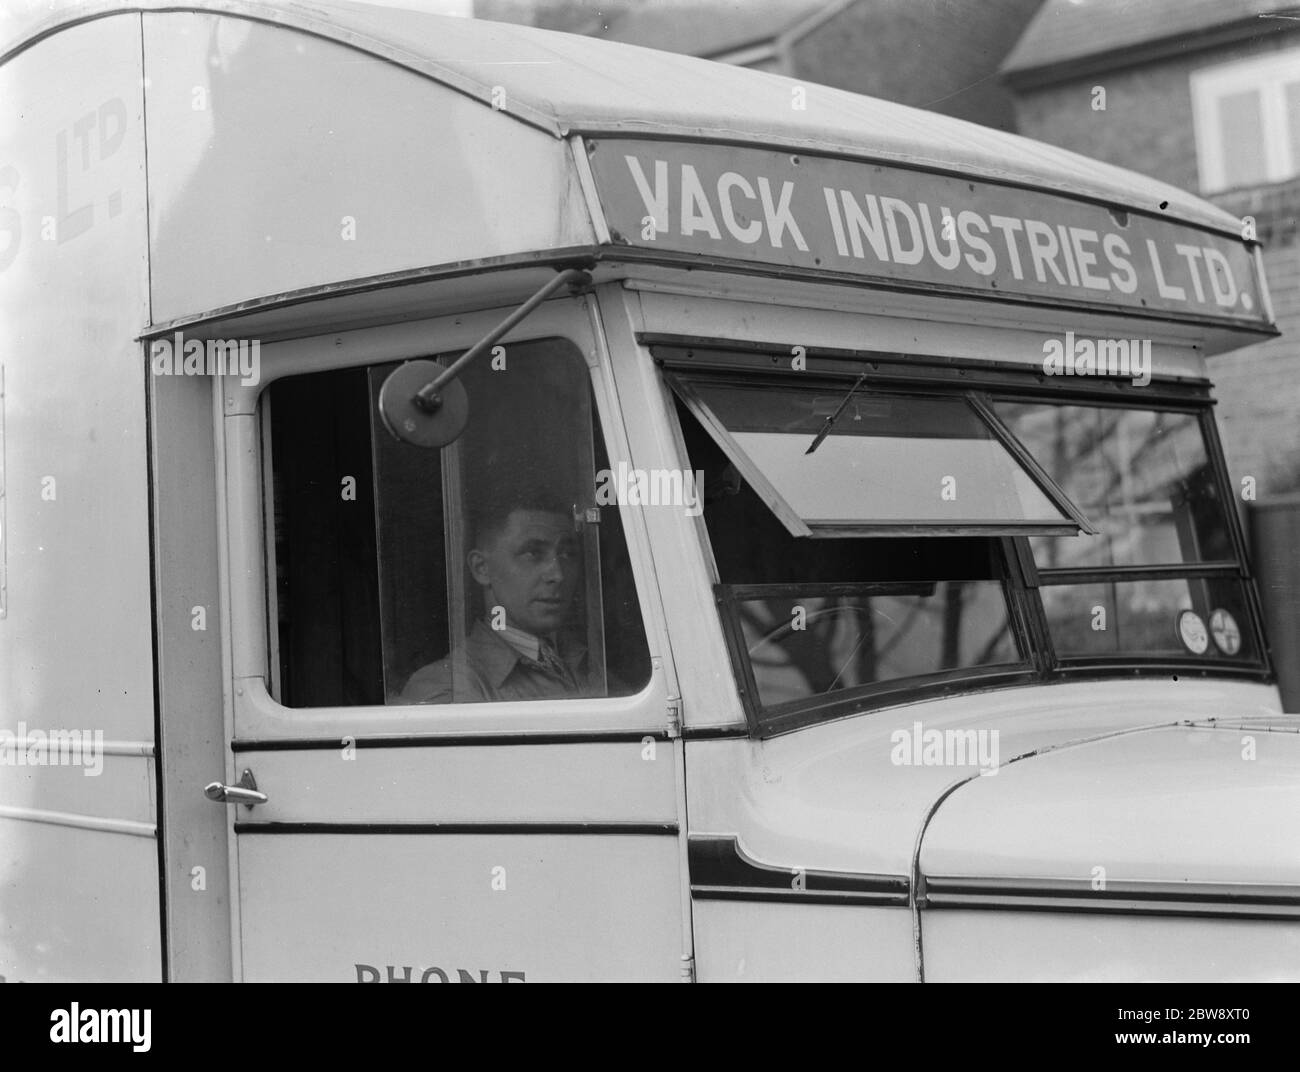 A Bedford truck belonging to Vack Industries Ltd from Kingston upon Thames , London . The truck has been converted into a mobile showroom for their oil burning apparatus and other domestic appliances . 1937 . Stock Photo